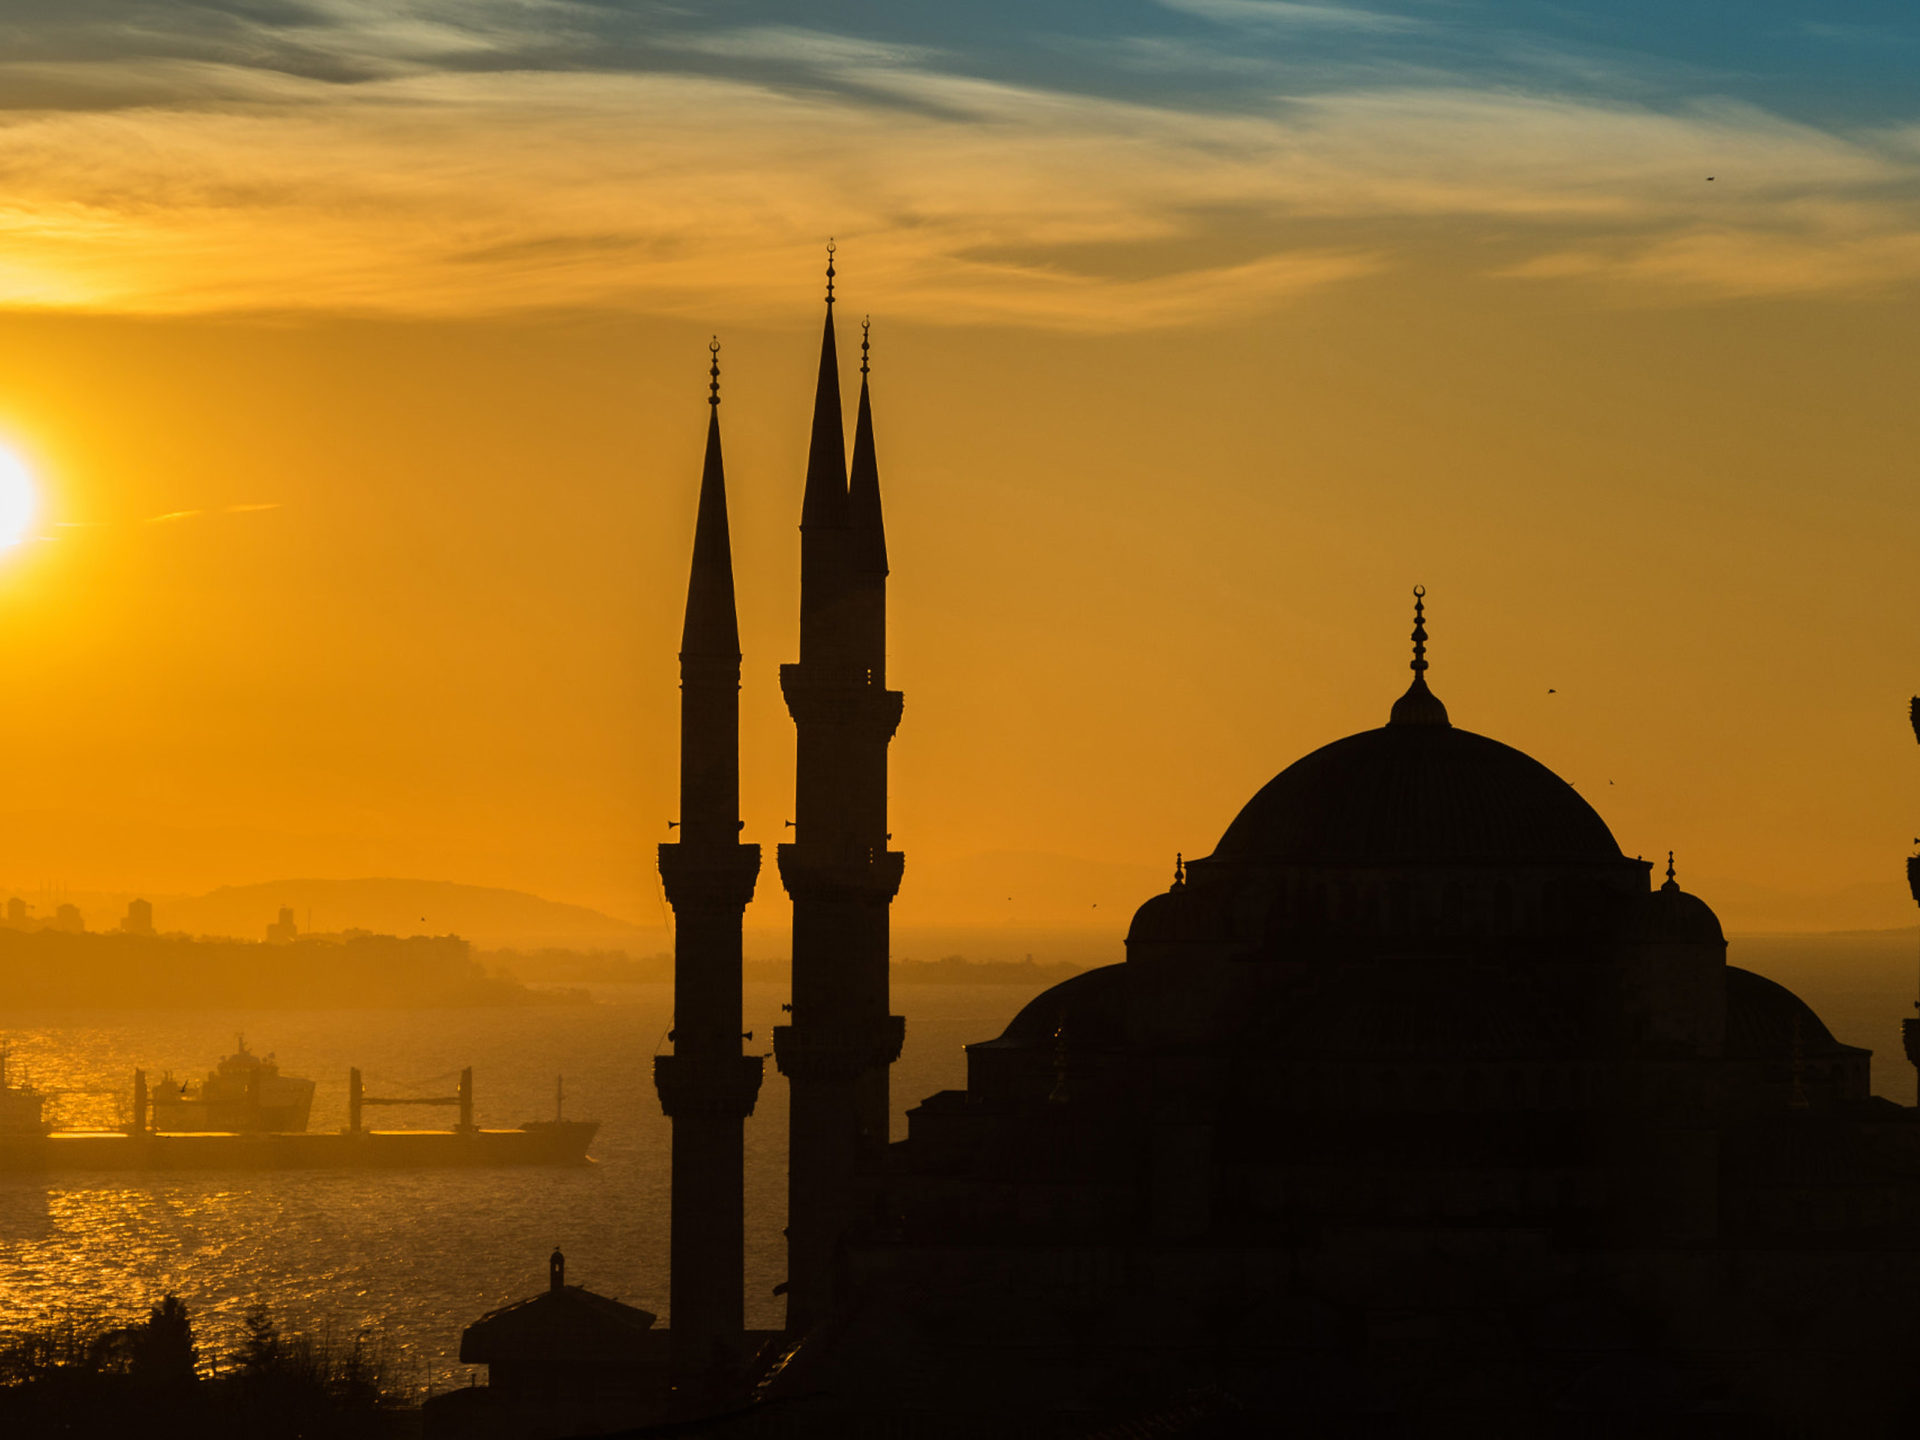 Sunnset At Istanbul Sultan Ahmed Mosque Turkish 4k Ultra HD Tv Wallpaper For Desktop Laptop Tablet And Mobile Phones 3840x2400, Wallpaper13.com